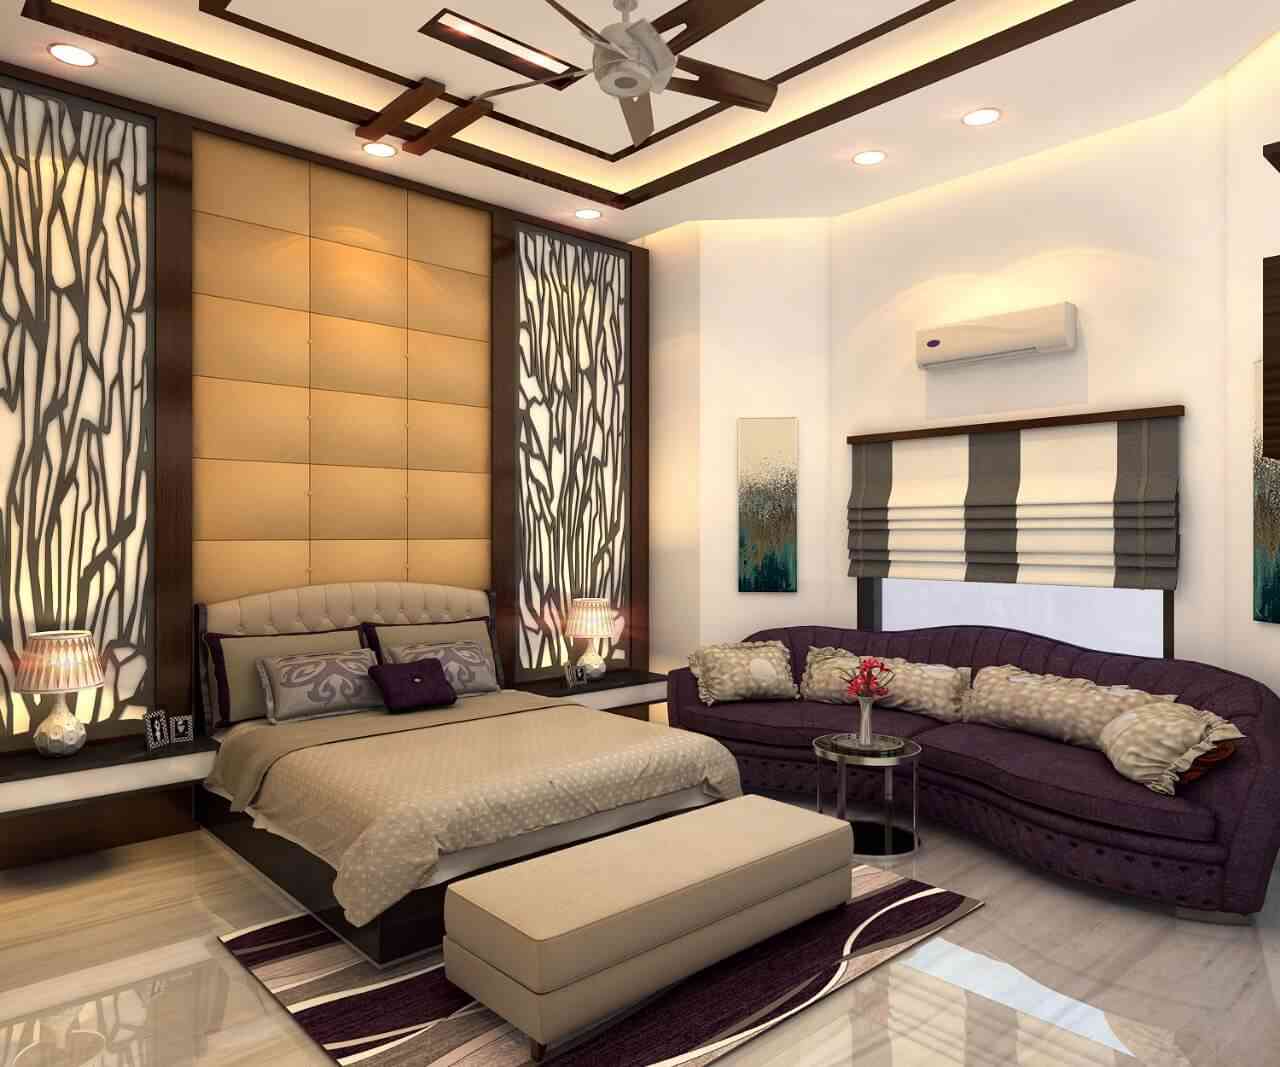 Classic Bedroom Design With A King Size Bed And 4-Seater Sofa